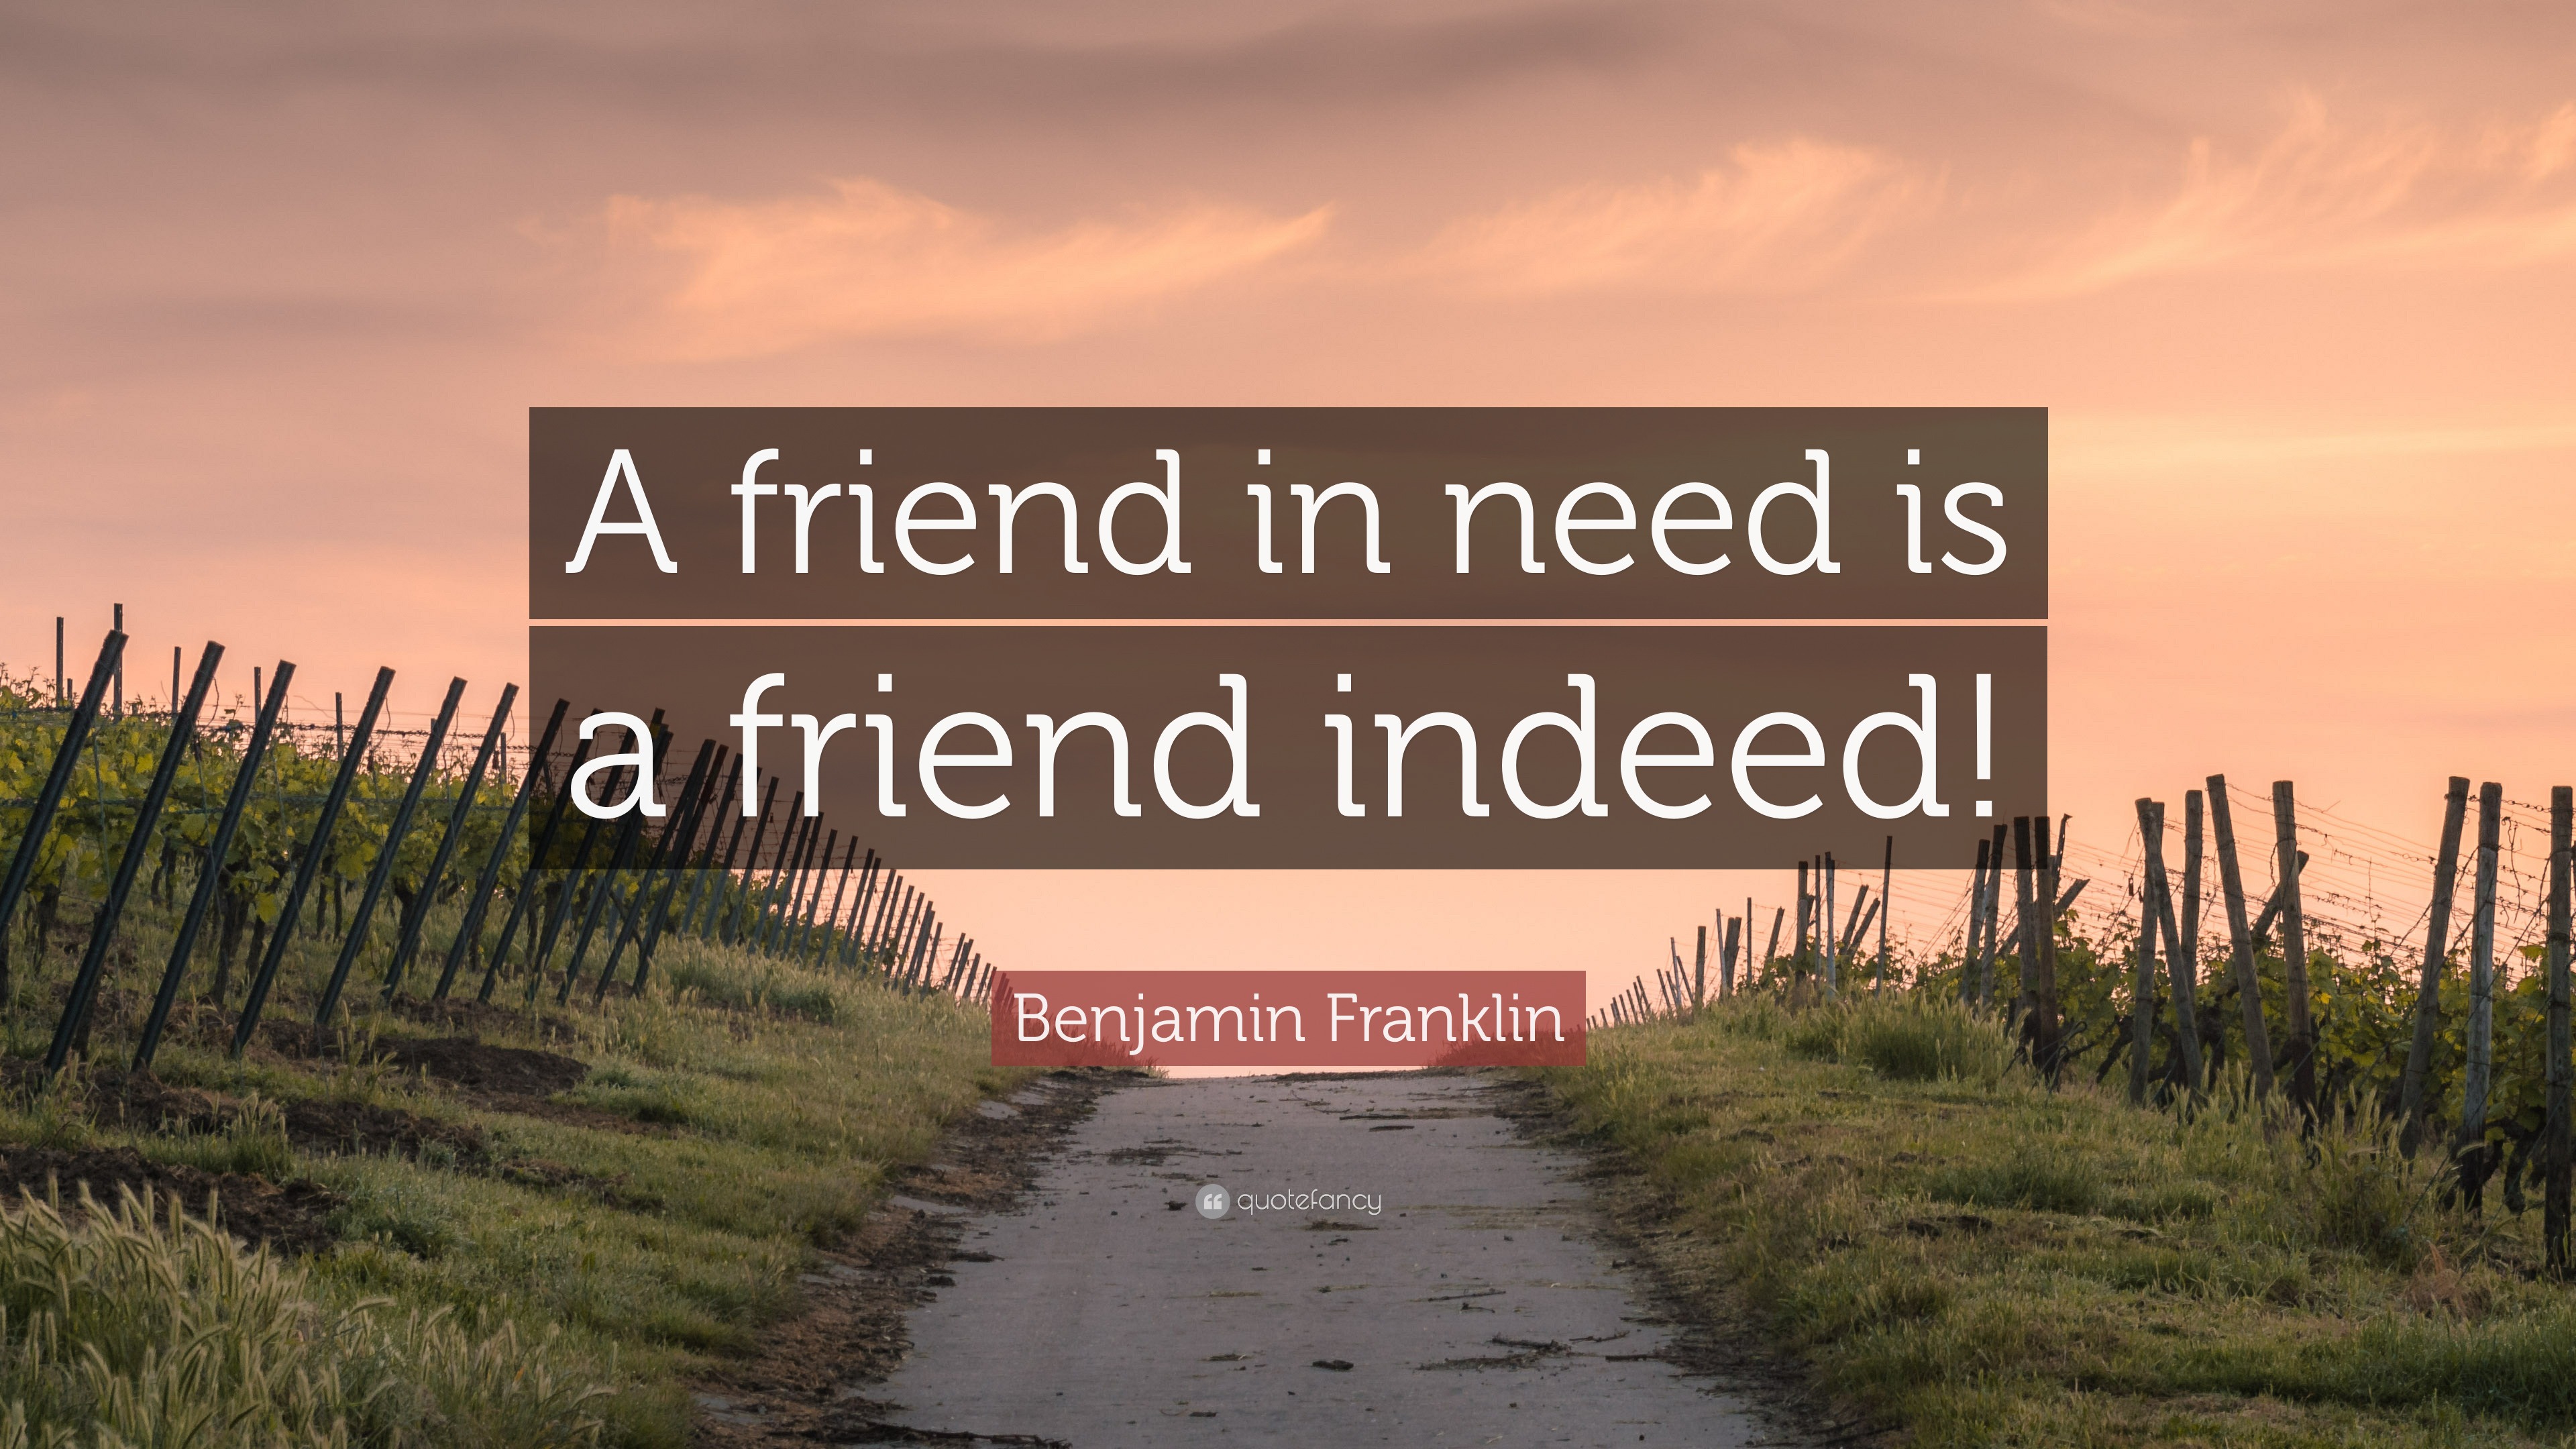 A Friend In Need Is A Friend Indeed – Essay, Meaning, Story, Quotes, Speech, Paragraph